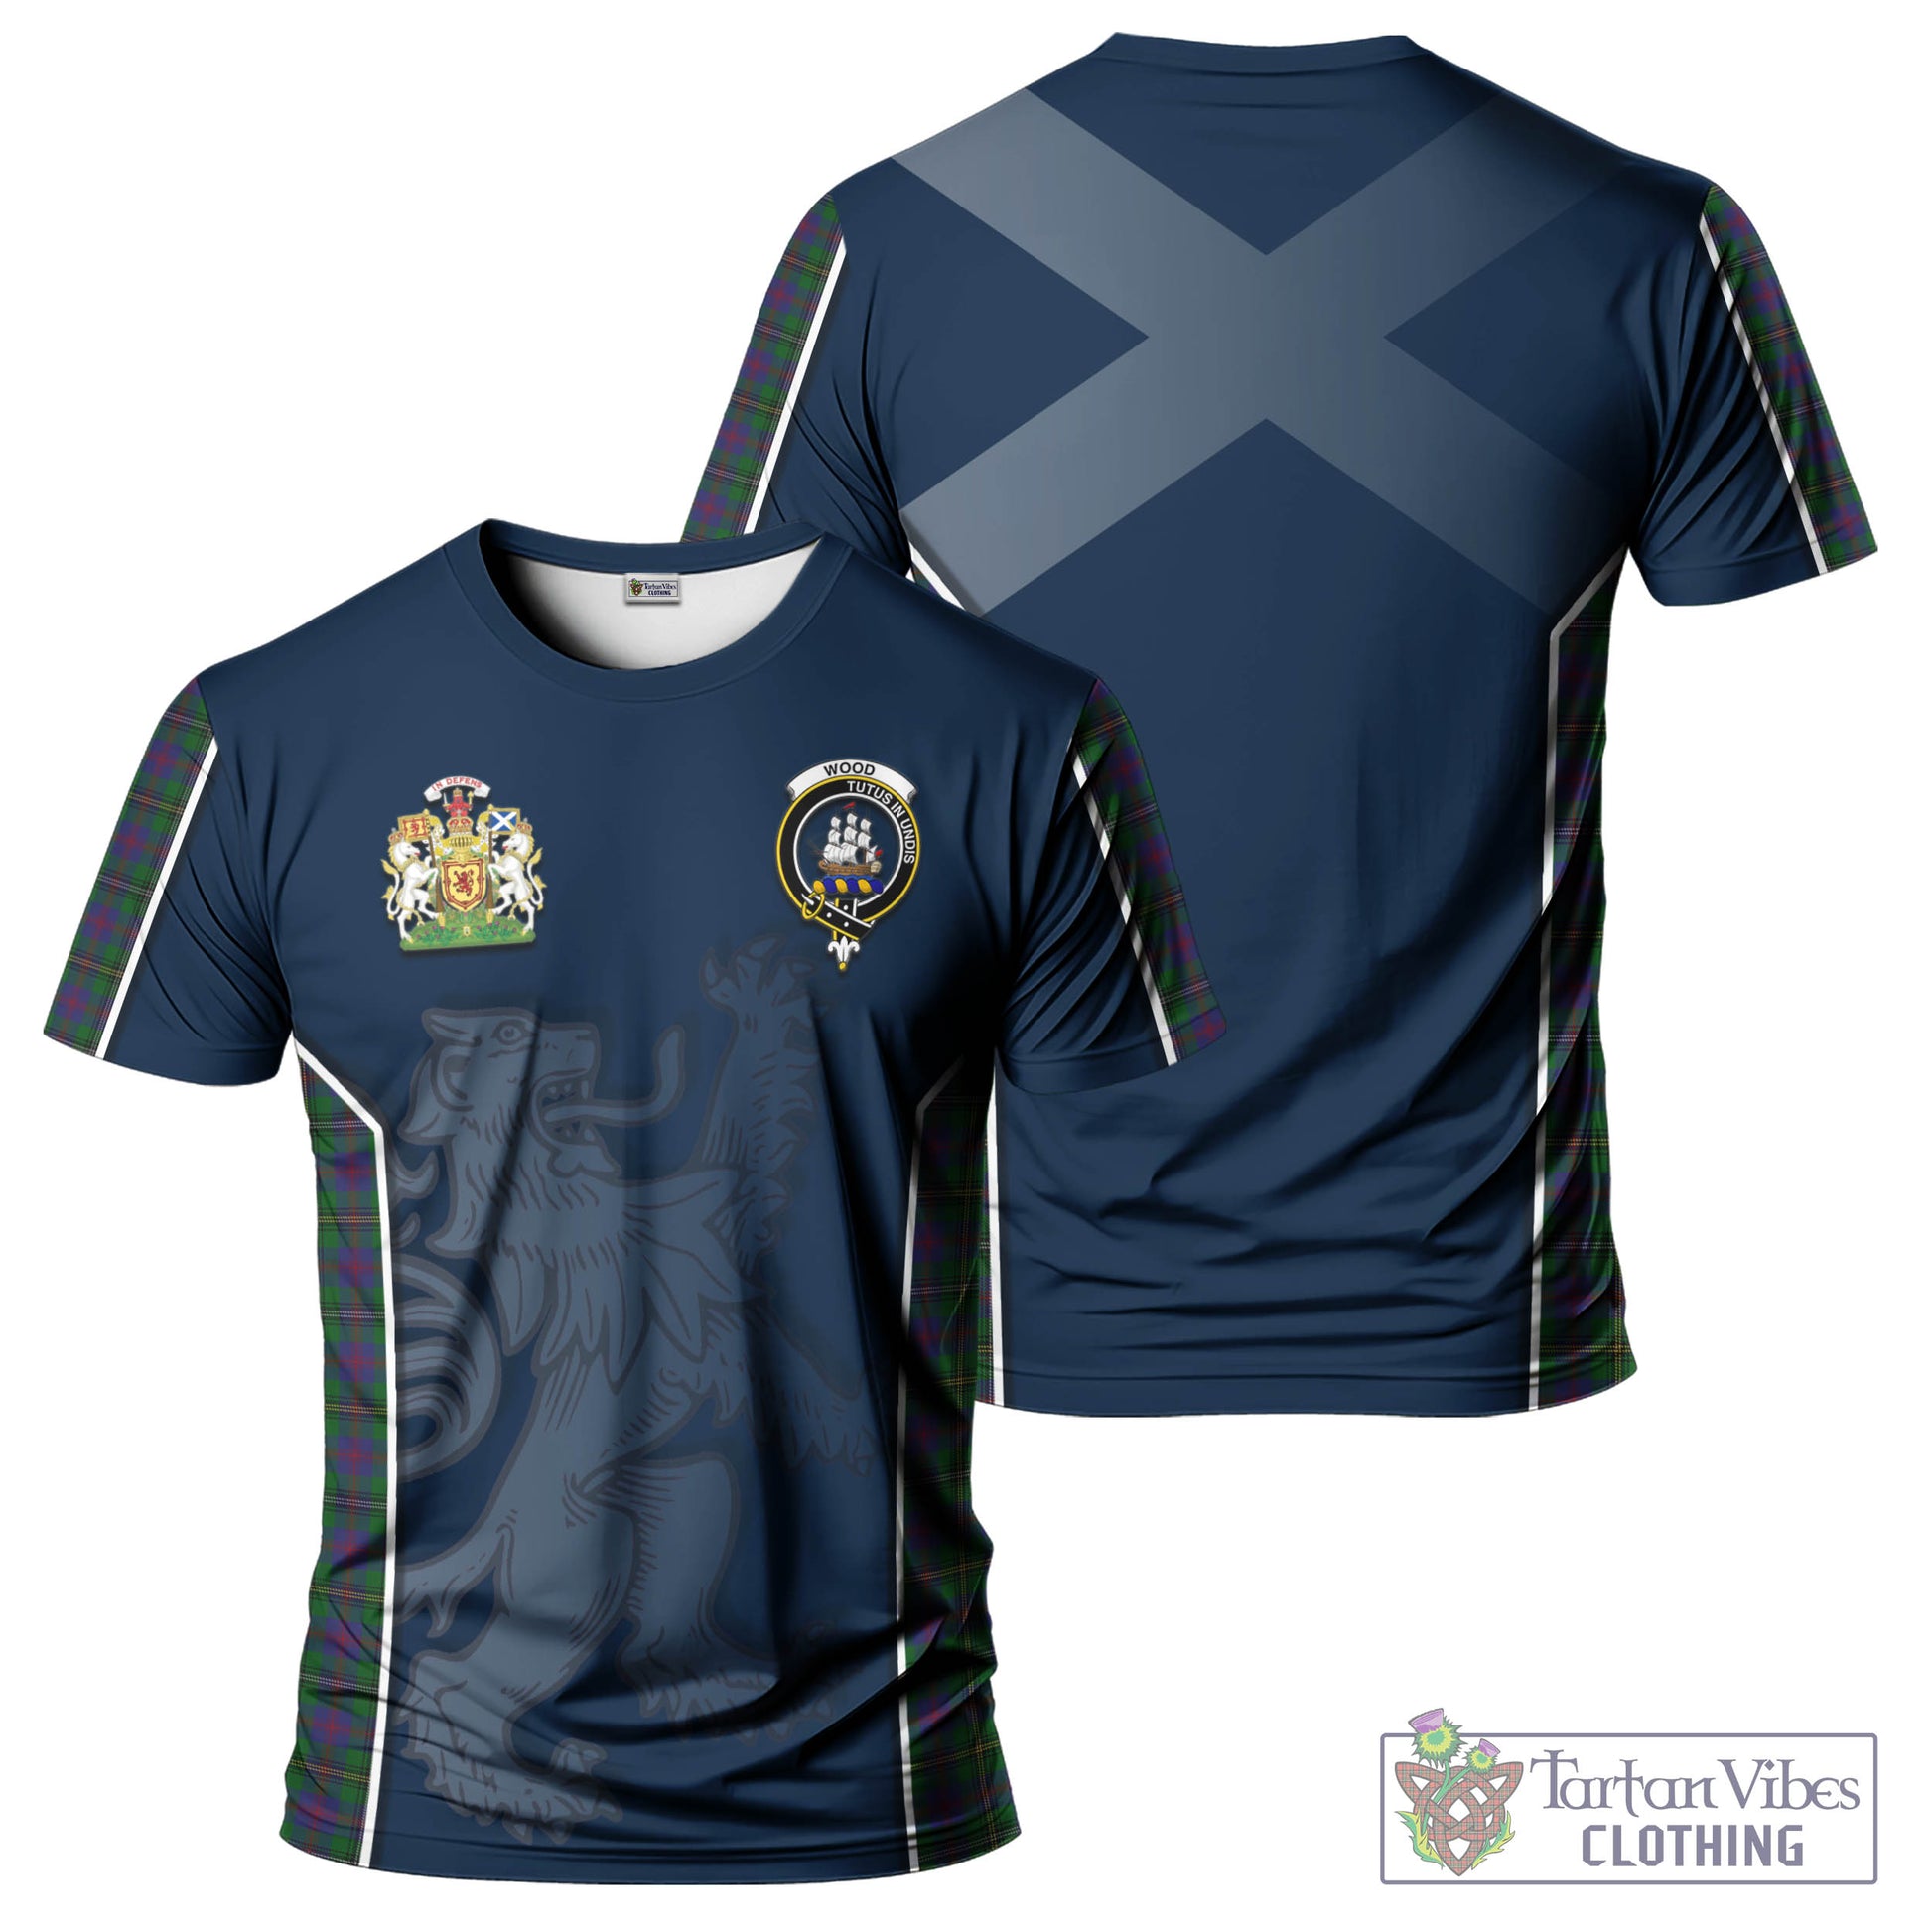 Tartan Vibes Clothing Wood Tartan T-Shirt with Family Crest and Lion Rampant Vibes Sport Style